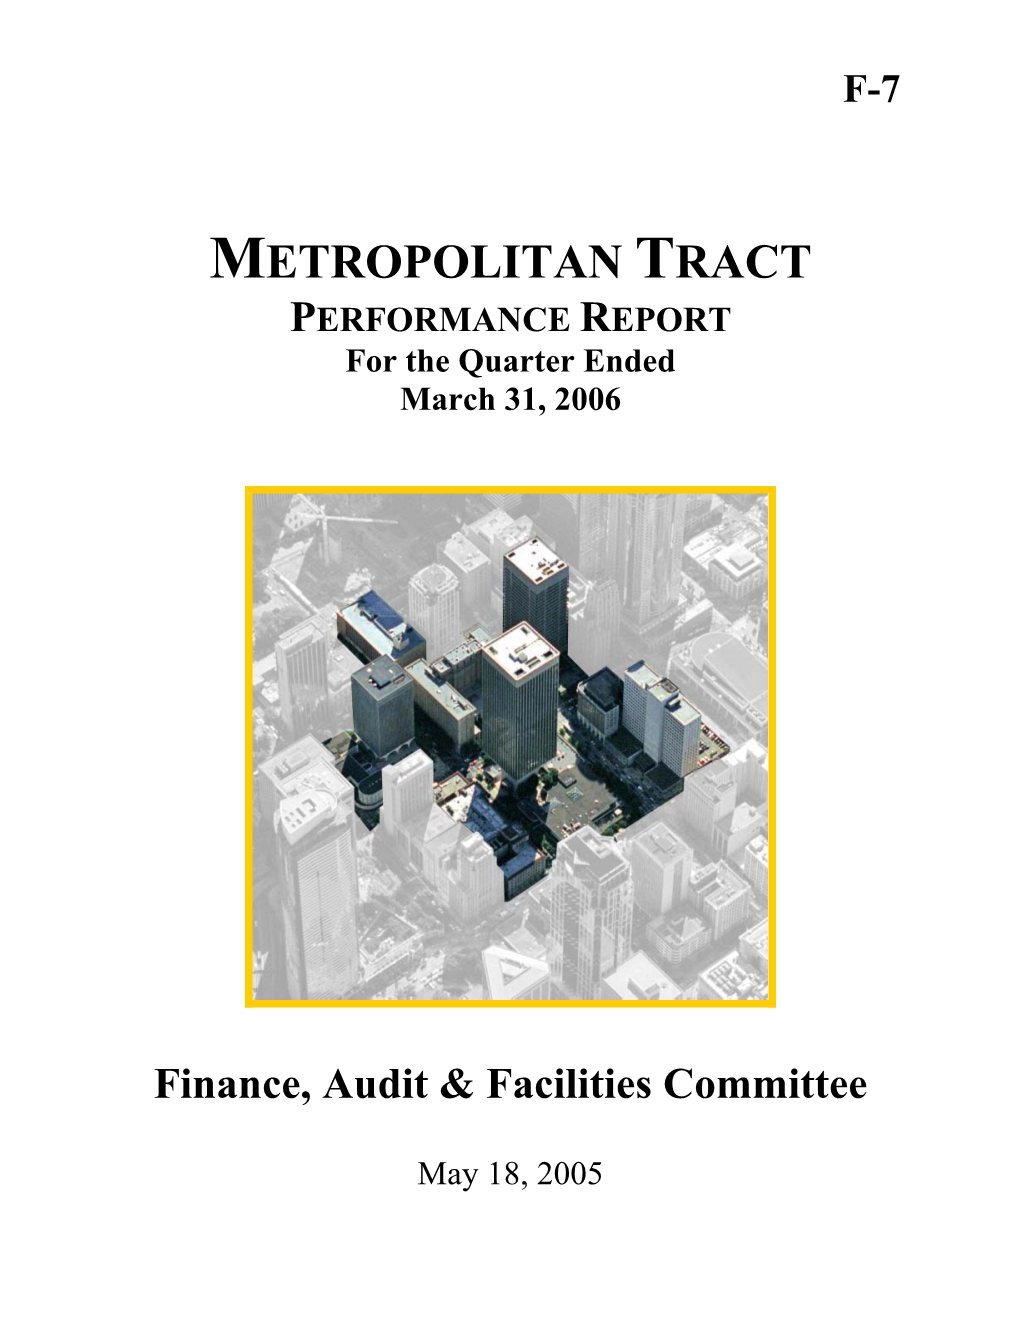 METROPOLITAN TRACT PERFORMANCE REPORT for the Quarter Ended March 31, 2006